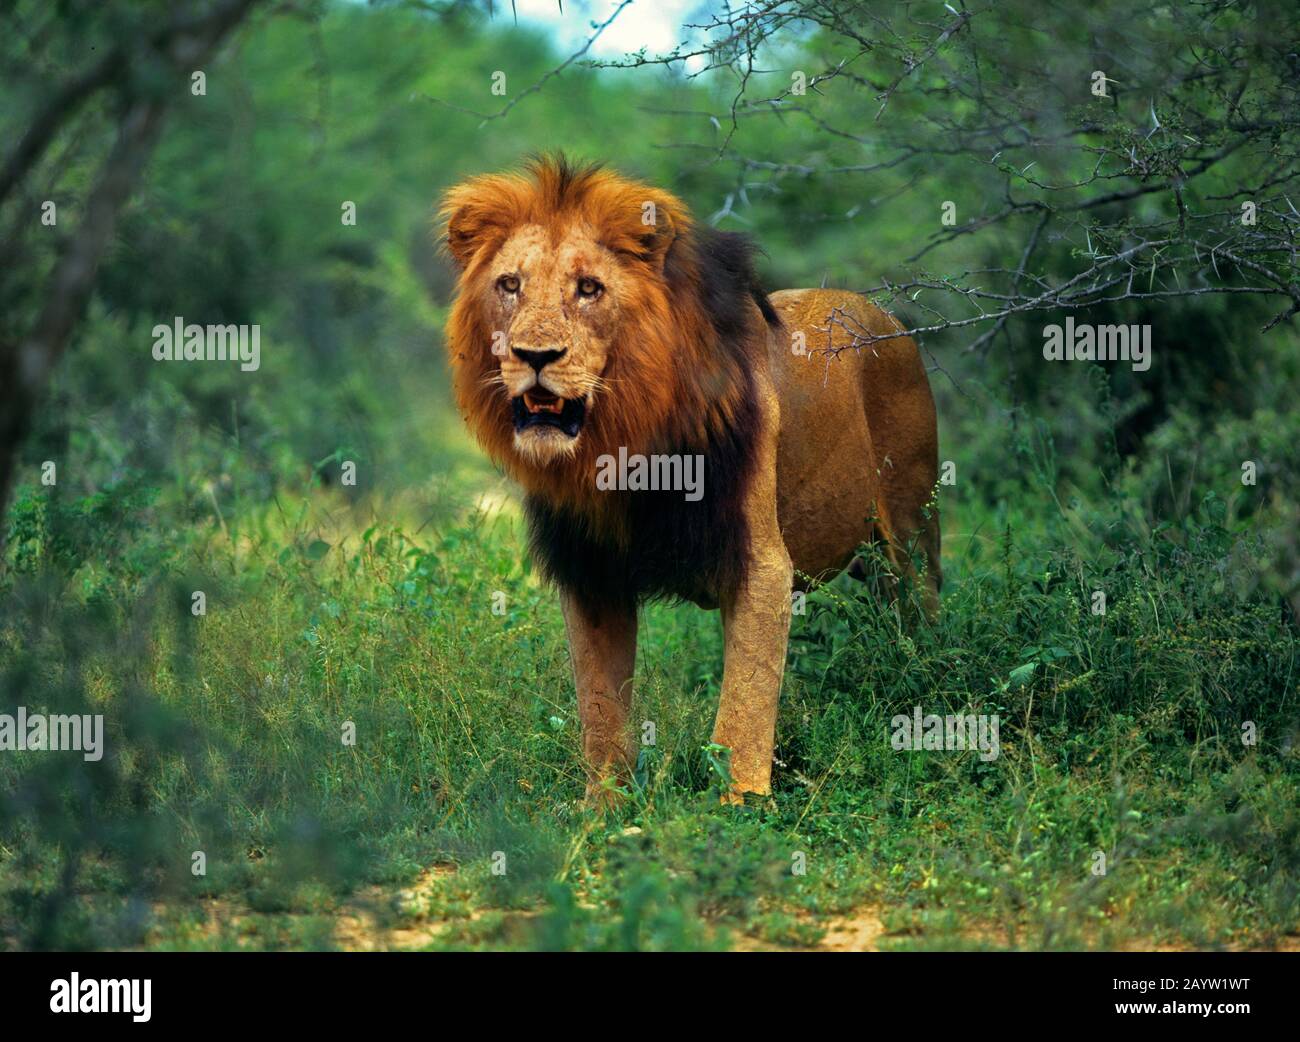 lion (Panthera leo), male lion standing in the shrubland, front view, Africa Stock Photo